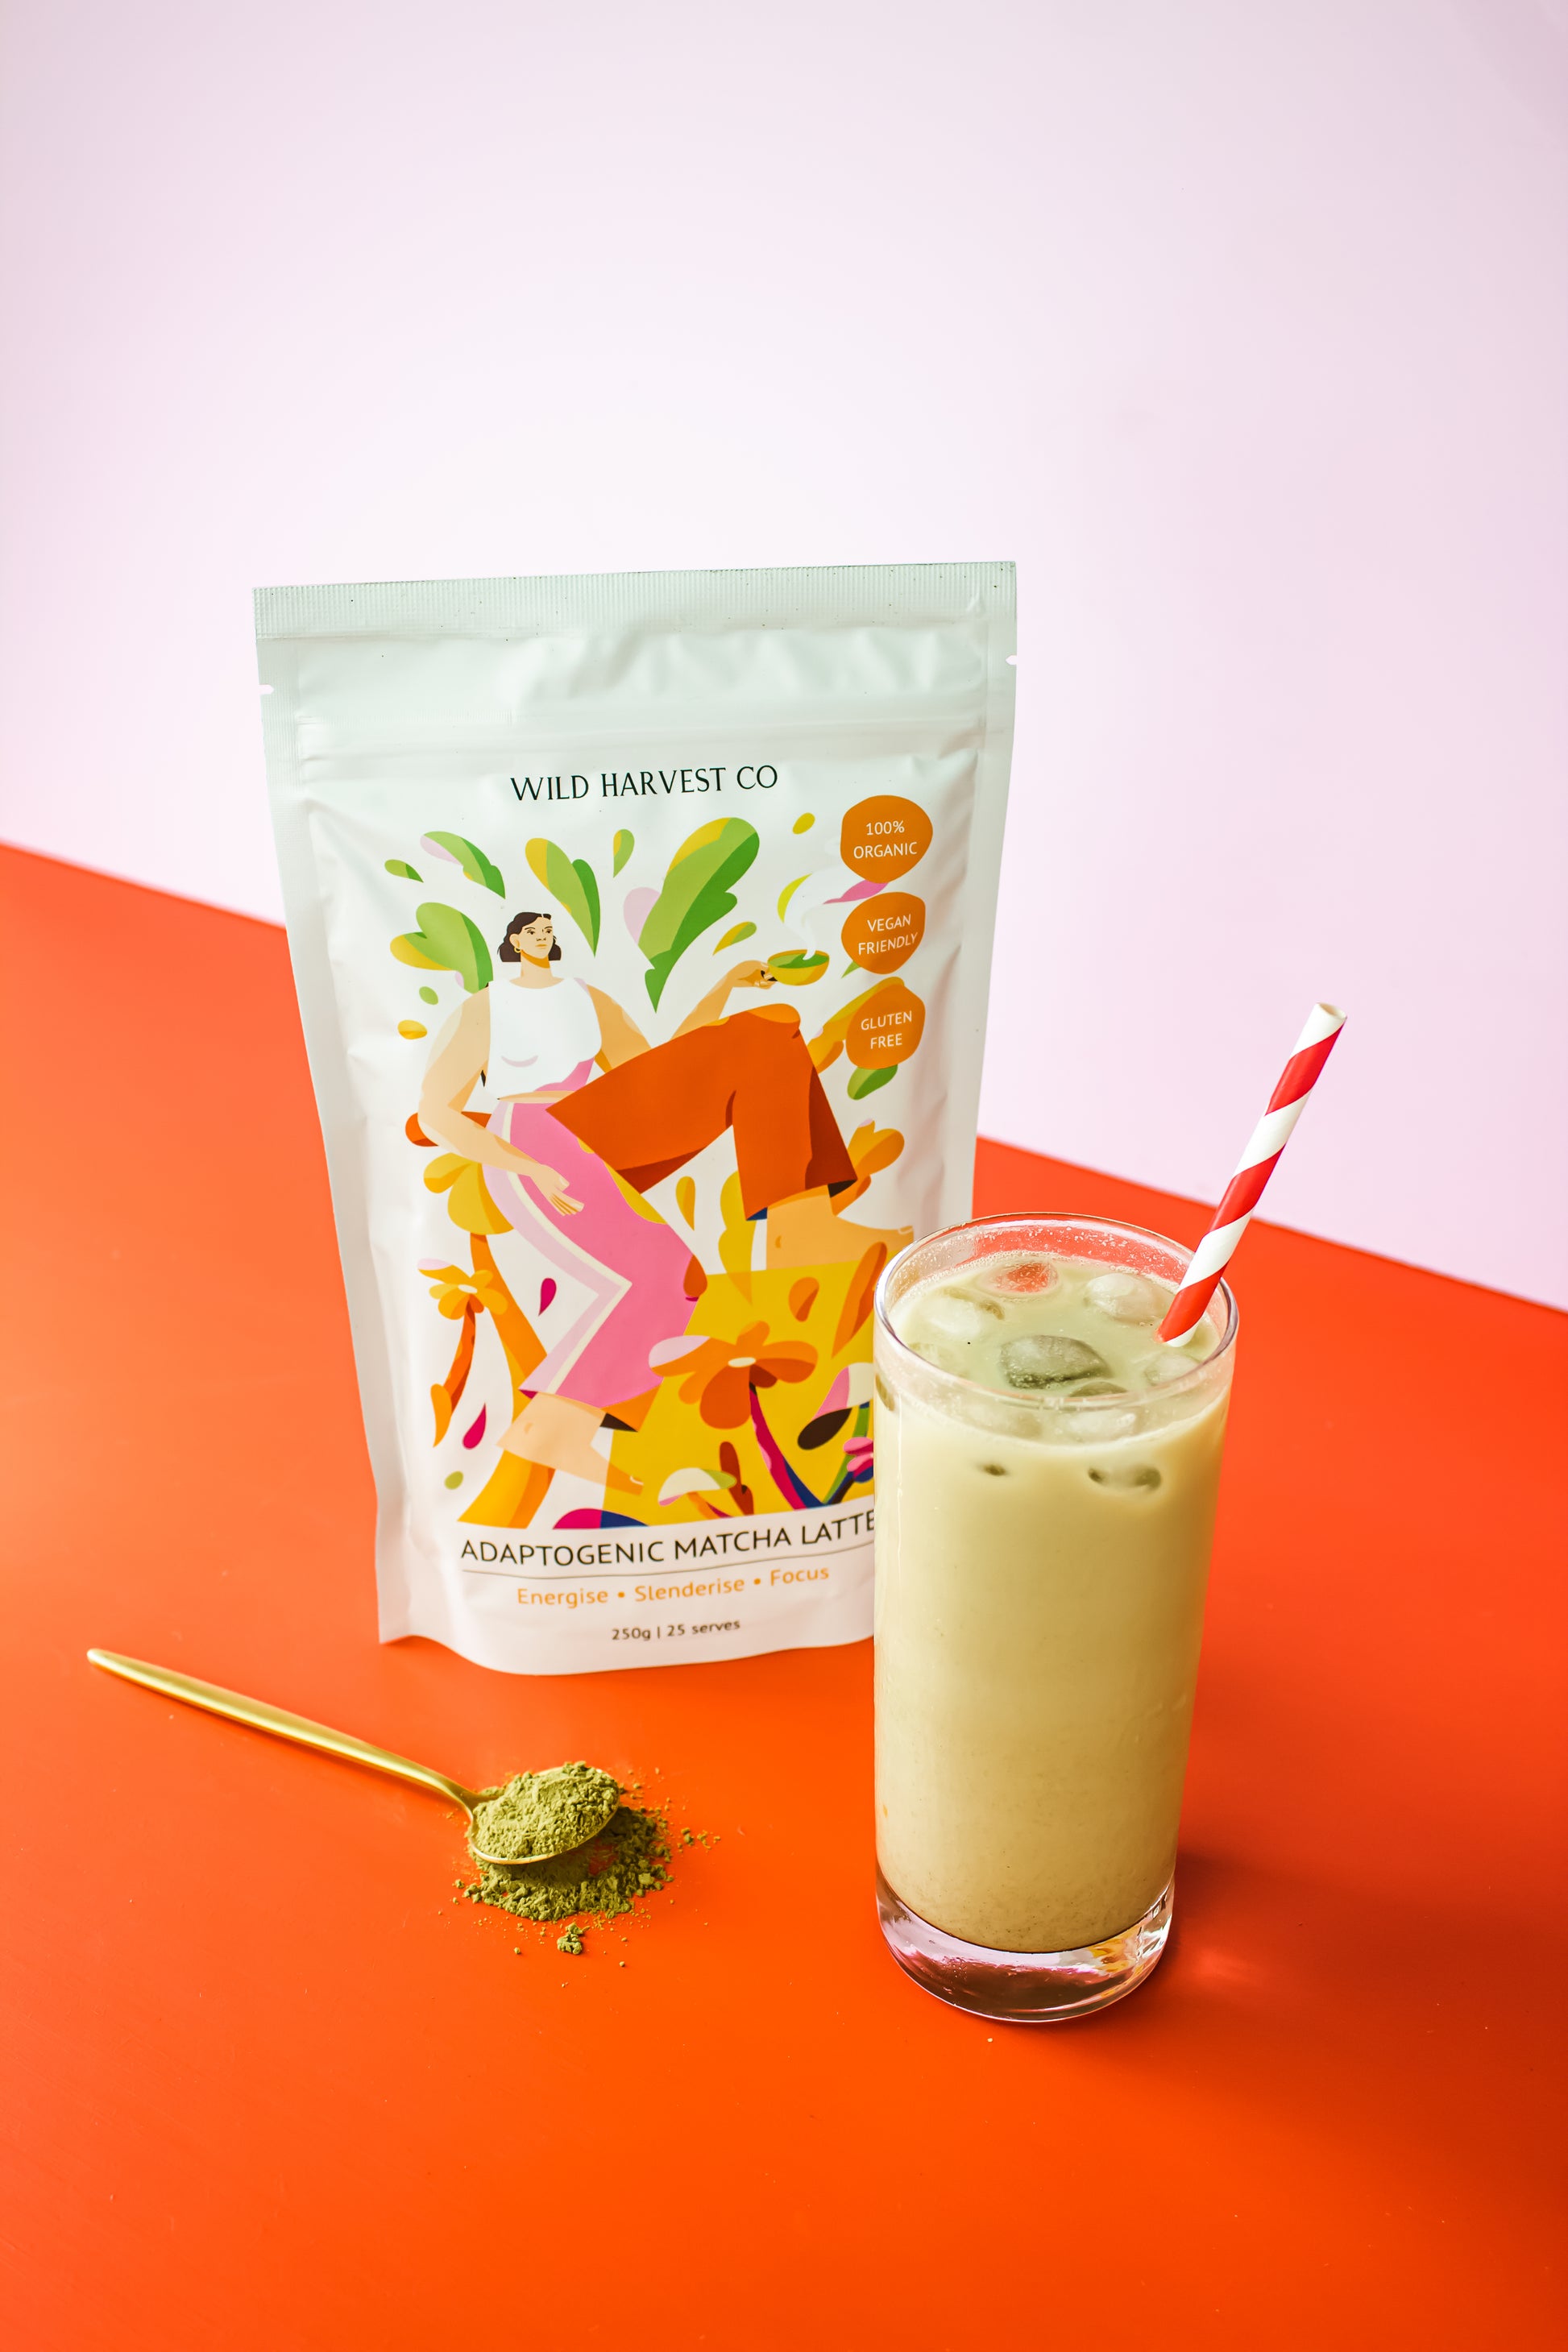 Wild Harvest Co Adaptogenic Matcha Latte Display with a mug filled with Matcha Latte, a teaspoon with Matcha latte powder and the Matcha Latte pouch